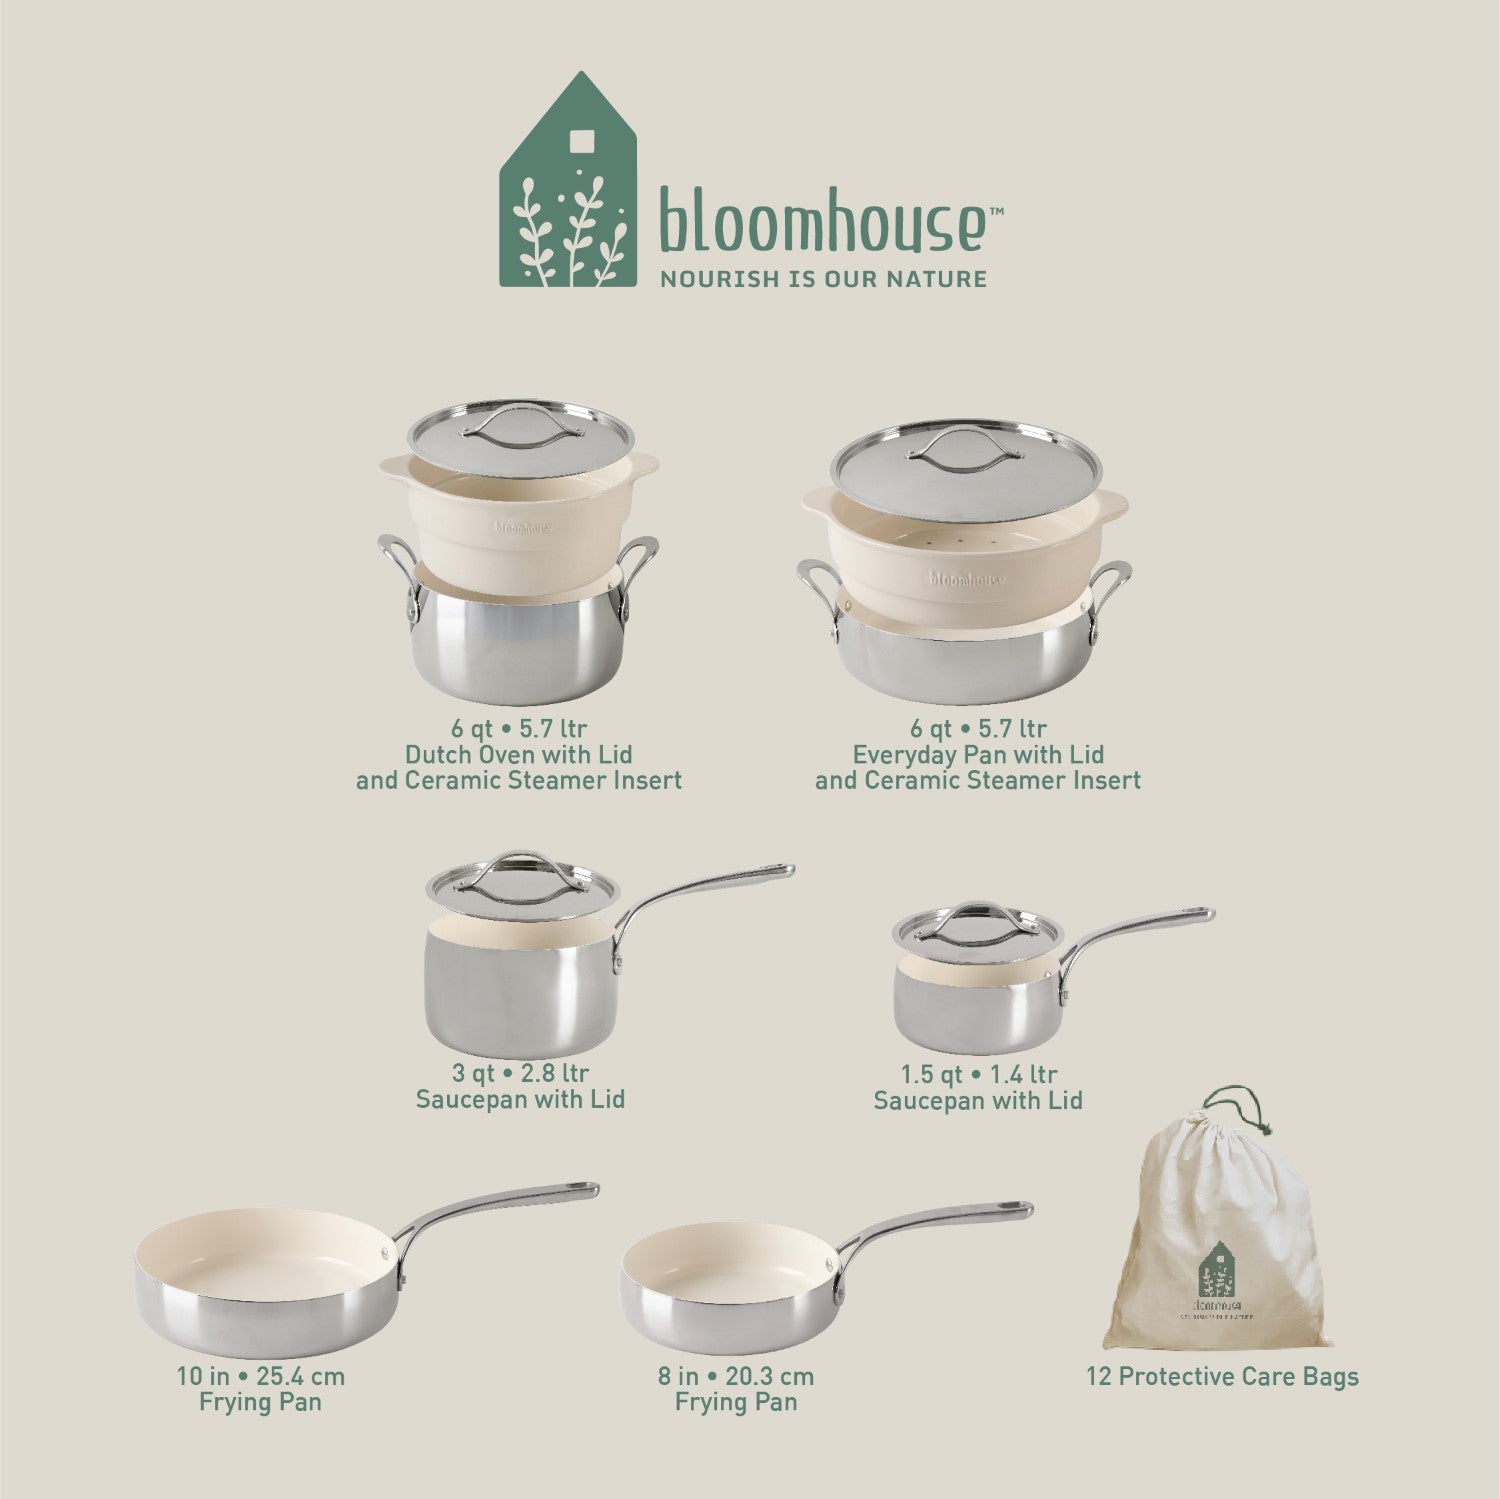 Bloomhouse 12 Piece Triply Stainless Steel Cookware Set w/ Non-Stick Non-Toxic Ceramic Interior and Ceramic Steamer Inserts